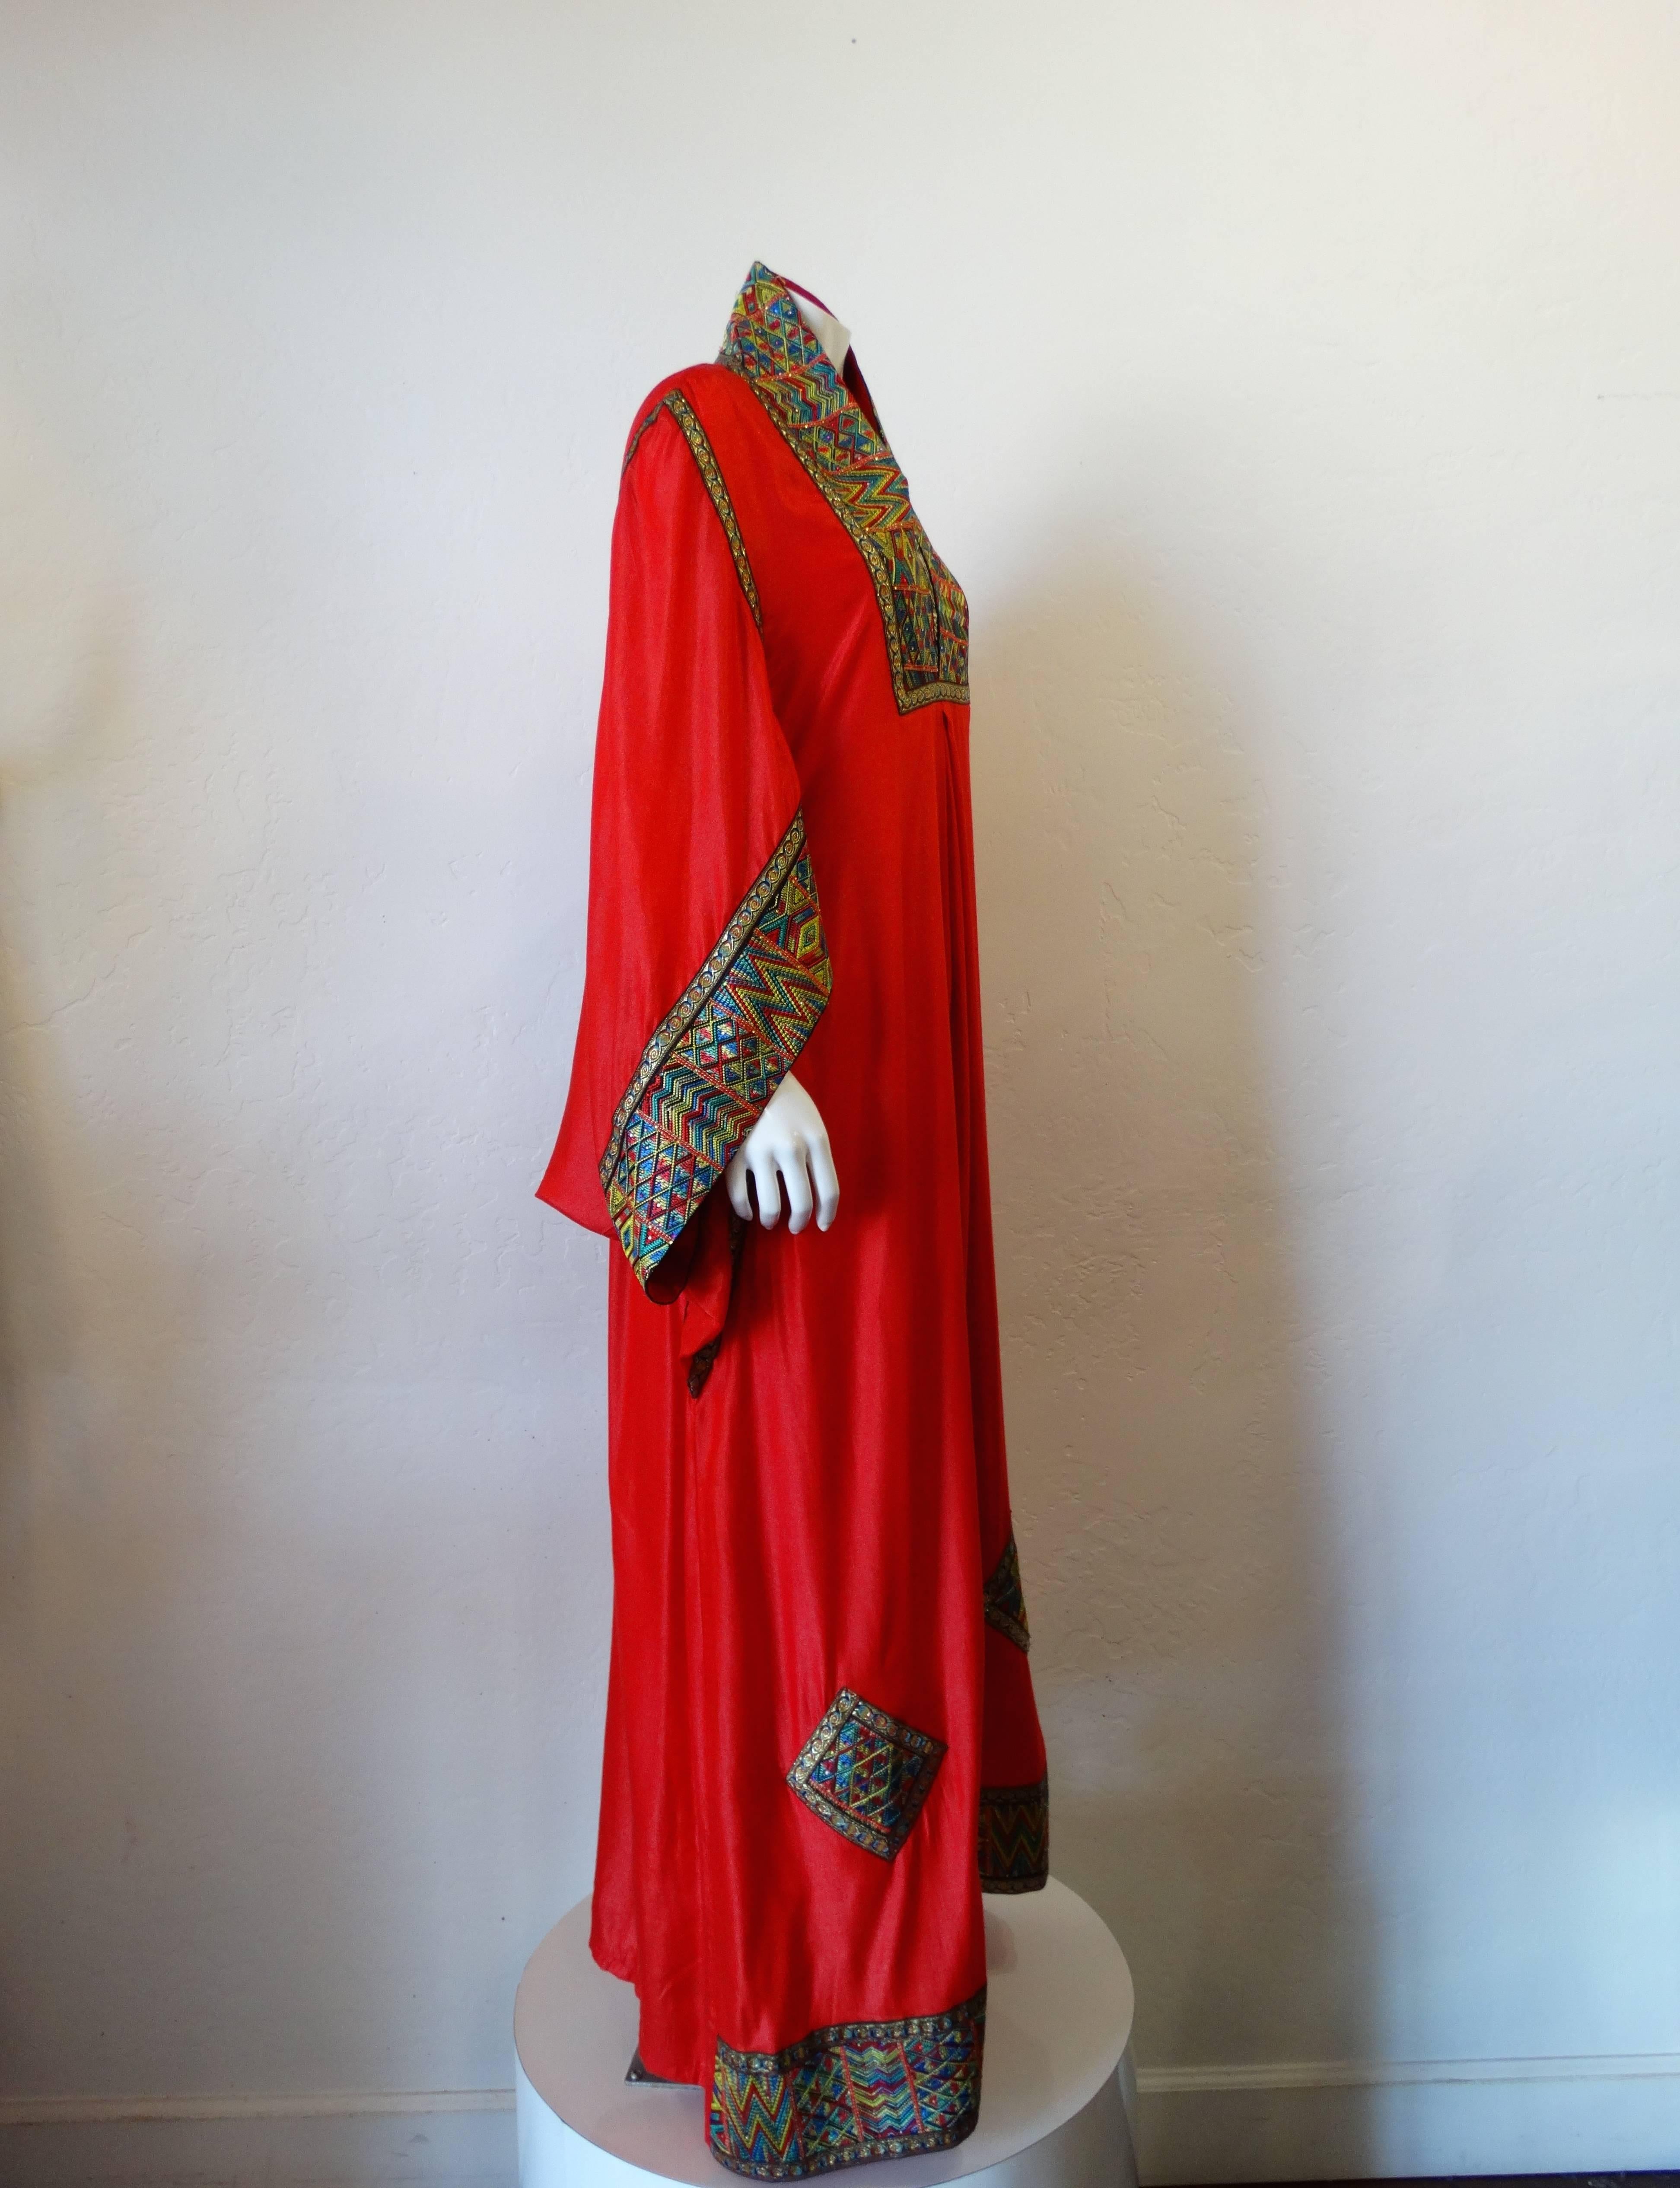 Incredible Israeli gown from the 1970s- designed by Nersyan. Made of brilliant fancy abaya red with multi color woven appliqué with multi color micro sequin elements with rainbow geometric patterns. Cocoon sleeves and high neckline add to the